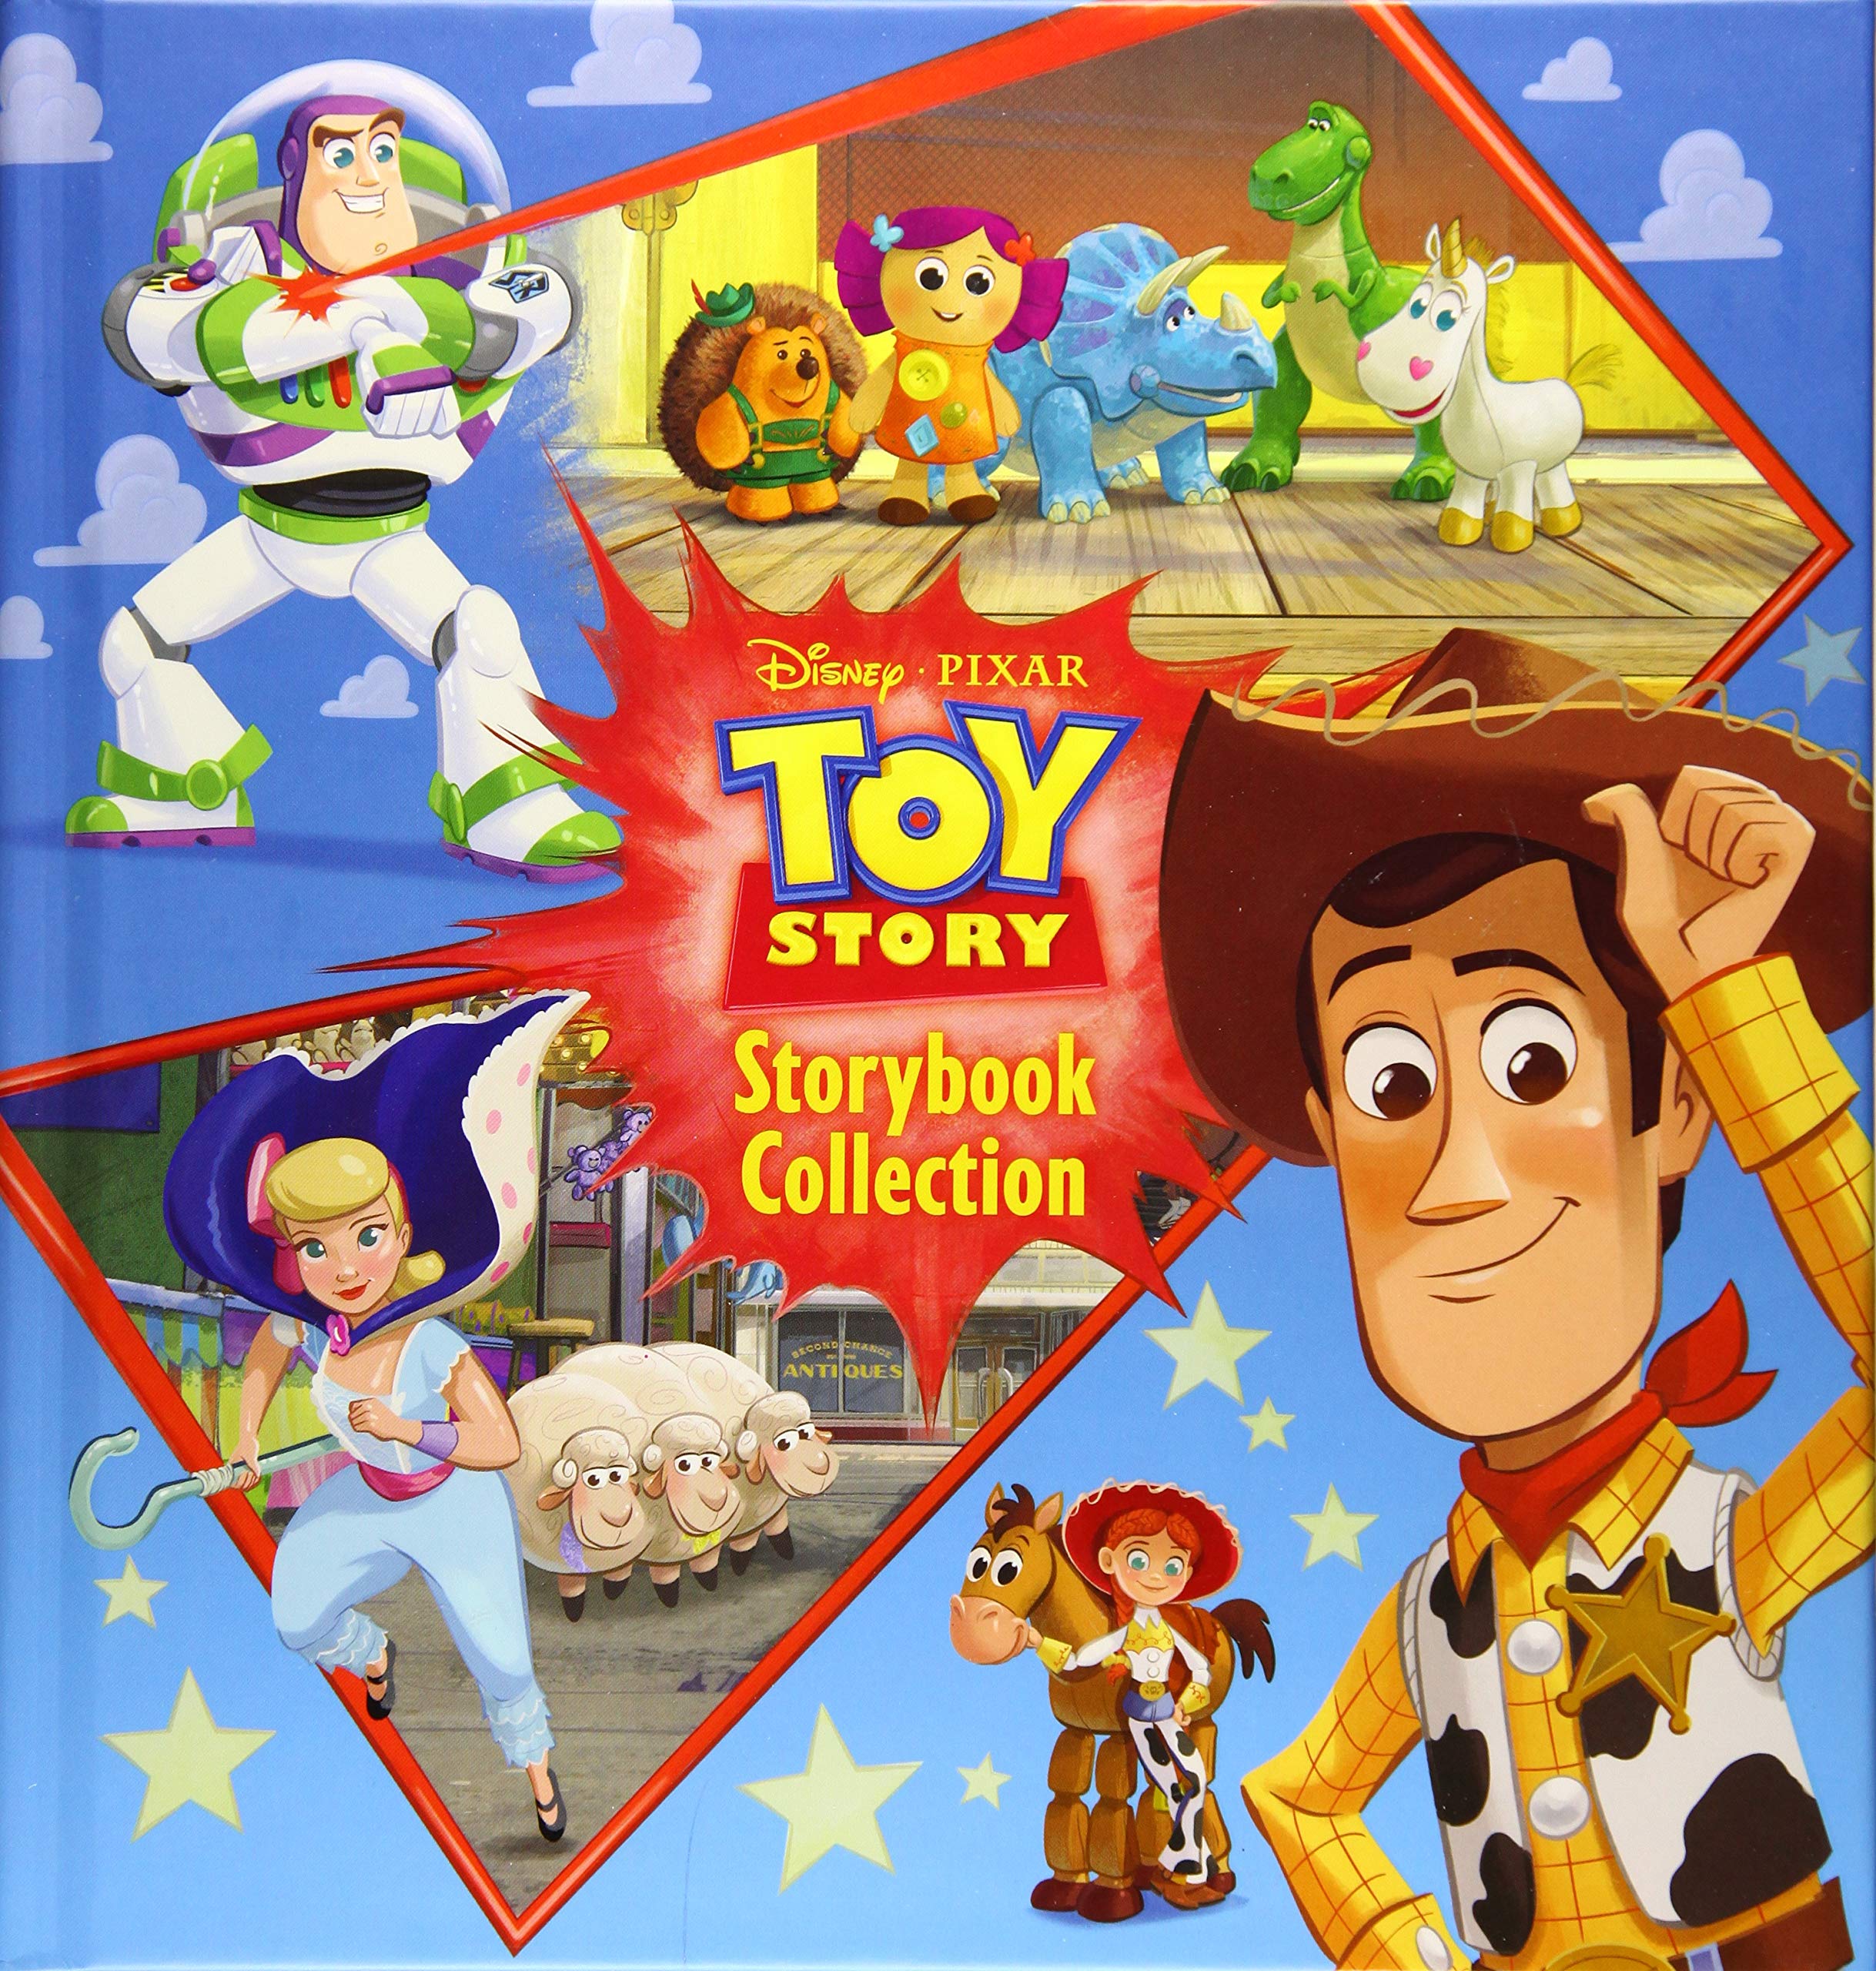 IMG : Disney Pixar Toy Story Storybook Collection